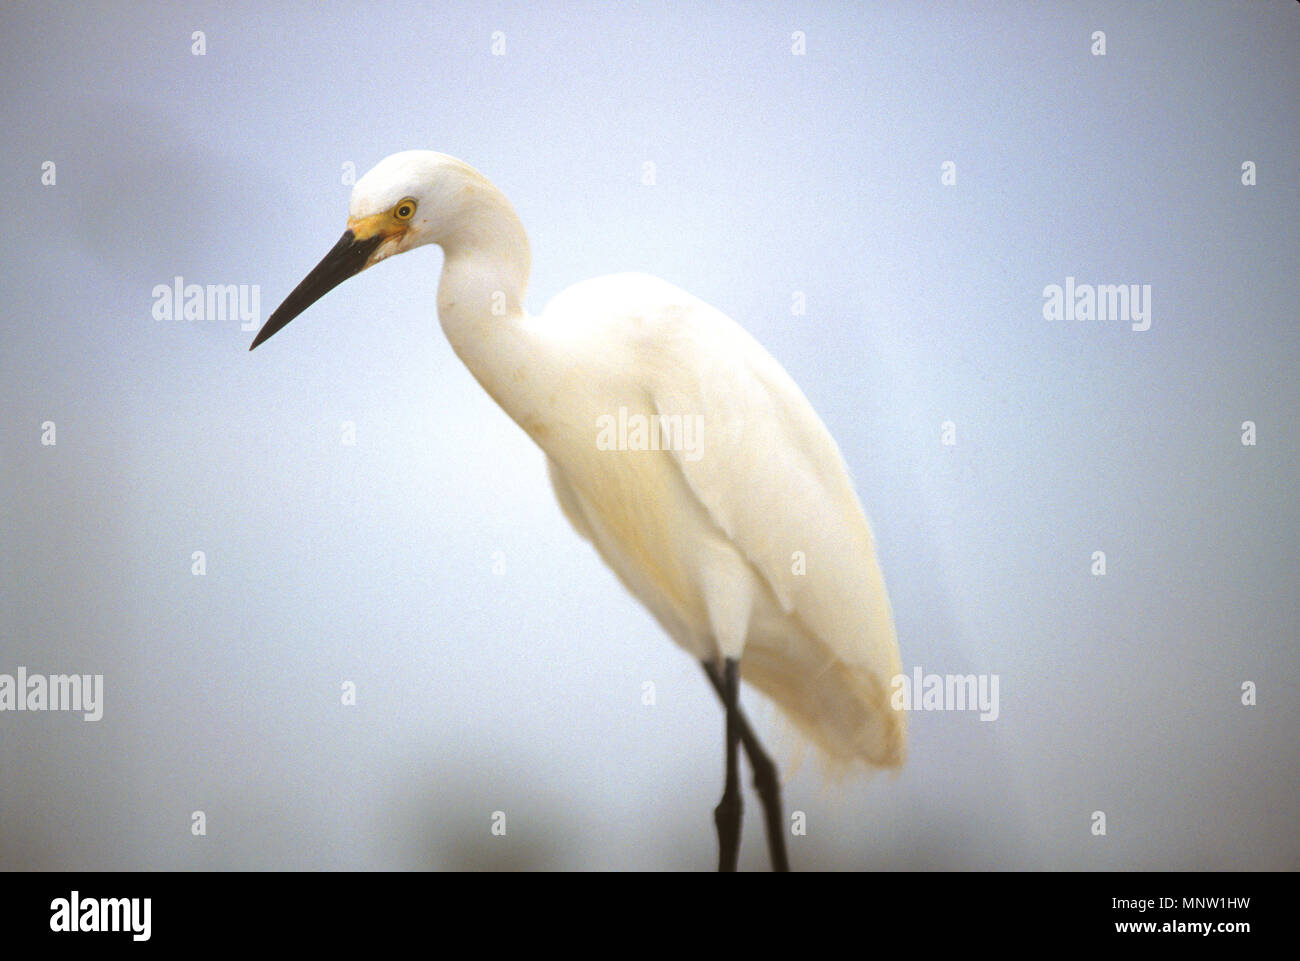 A Snowy Egret (Egretta thula) on the docks in Clearwater, Florida, USA Stock Photo